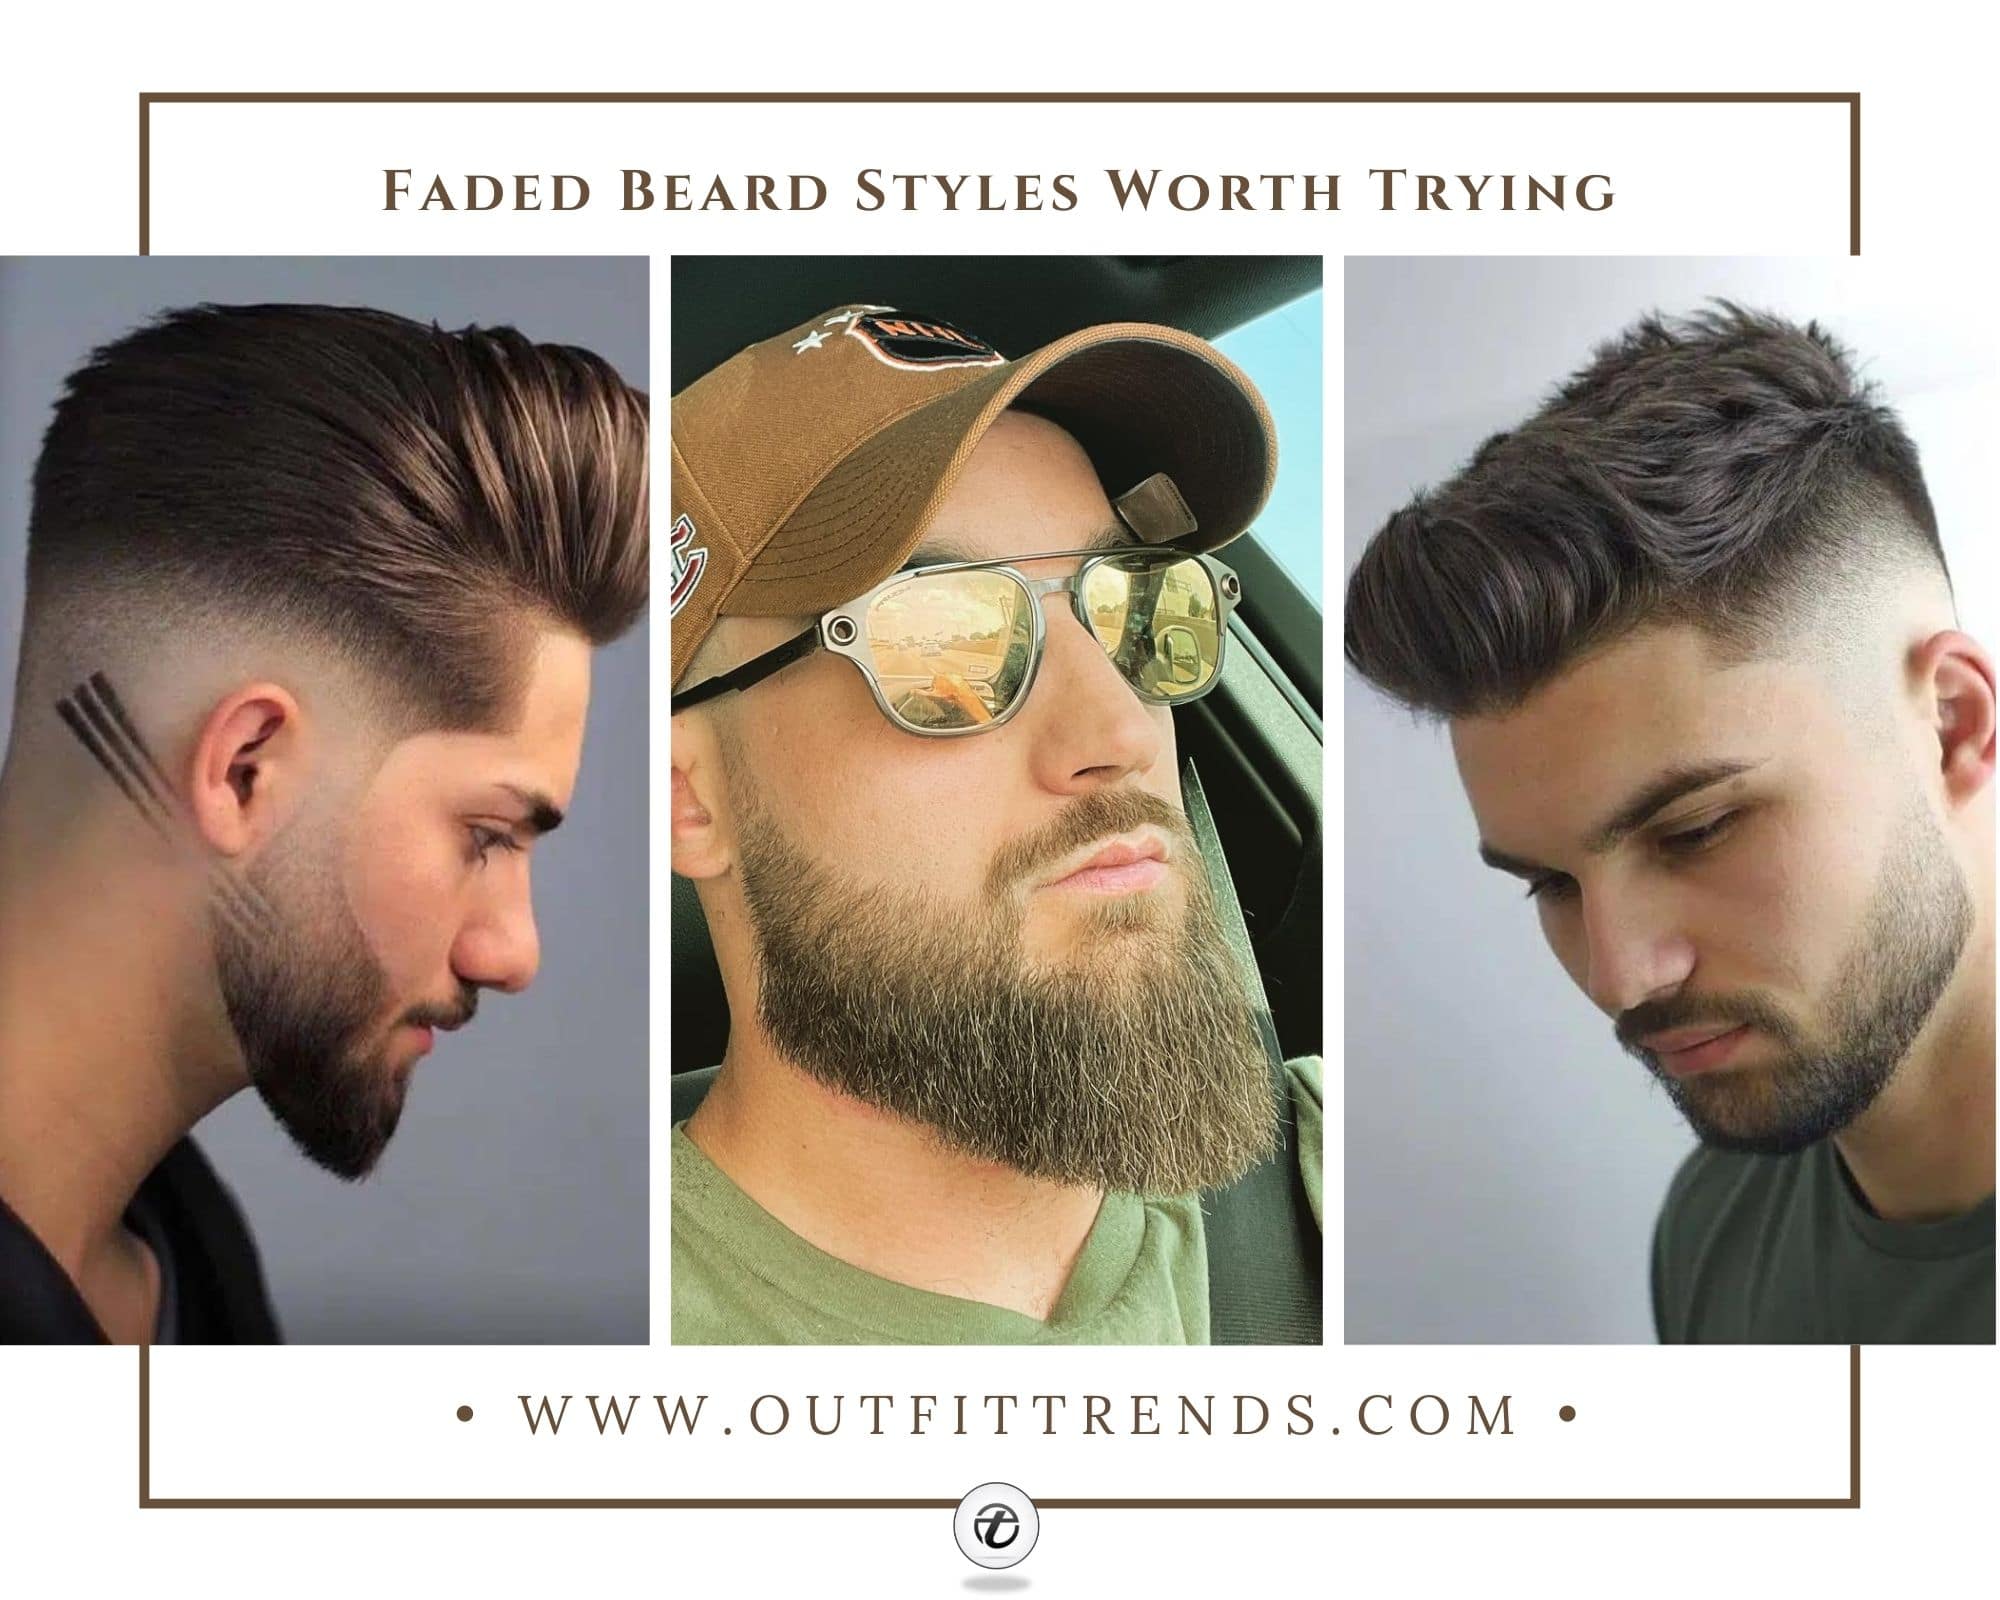 100+ Oval Face Hairstyles Male Indian (2023) - TailoringinHindi